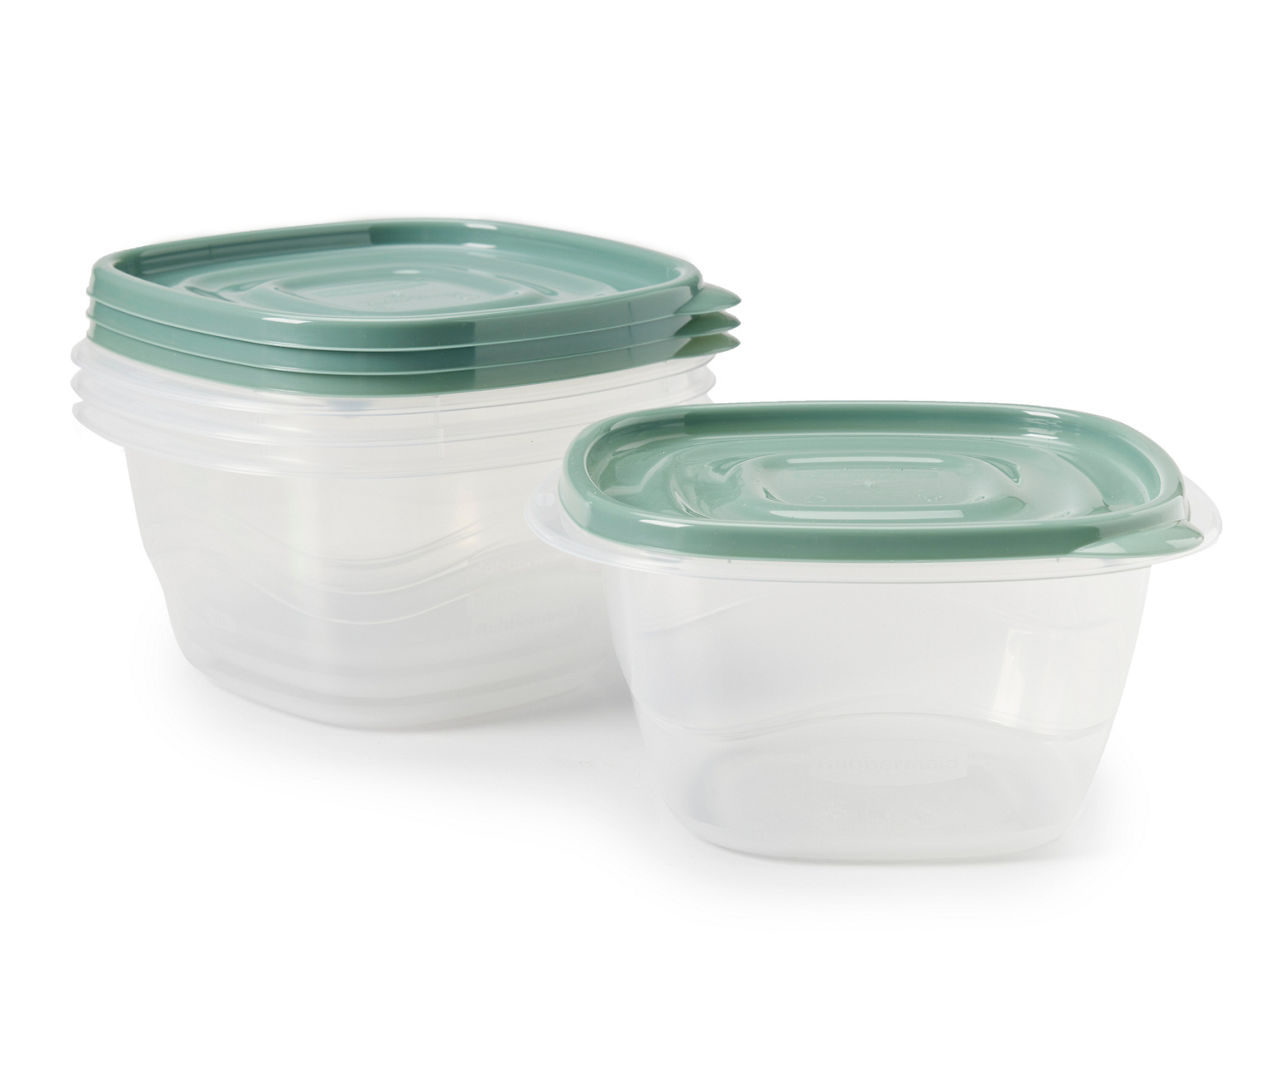 Rubbermaid TakeAlongs Mini Square Food Storage Containers, 5-Pc. Set